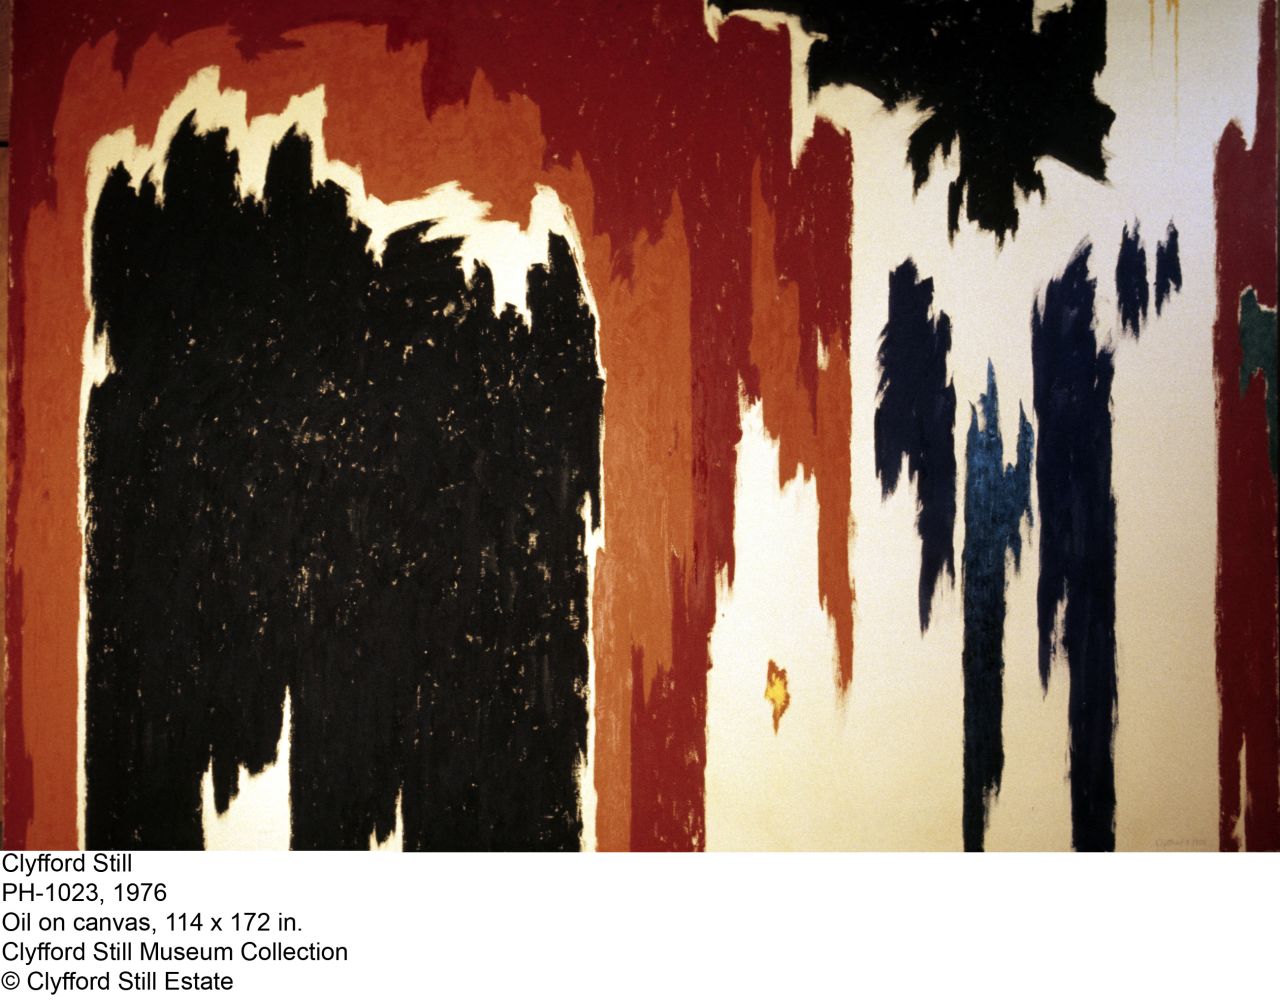 Toward the end of his career, Still's art started to become even more abstract -- objects lost their shape entirely, as seen in this 1976 work titled "PH-1023."